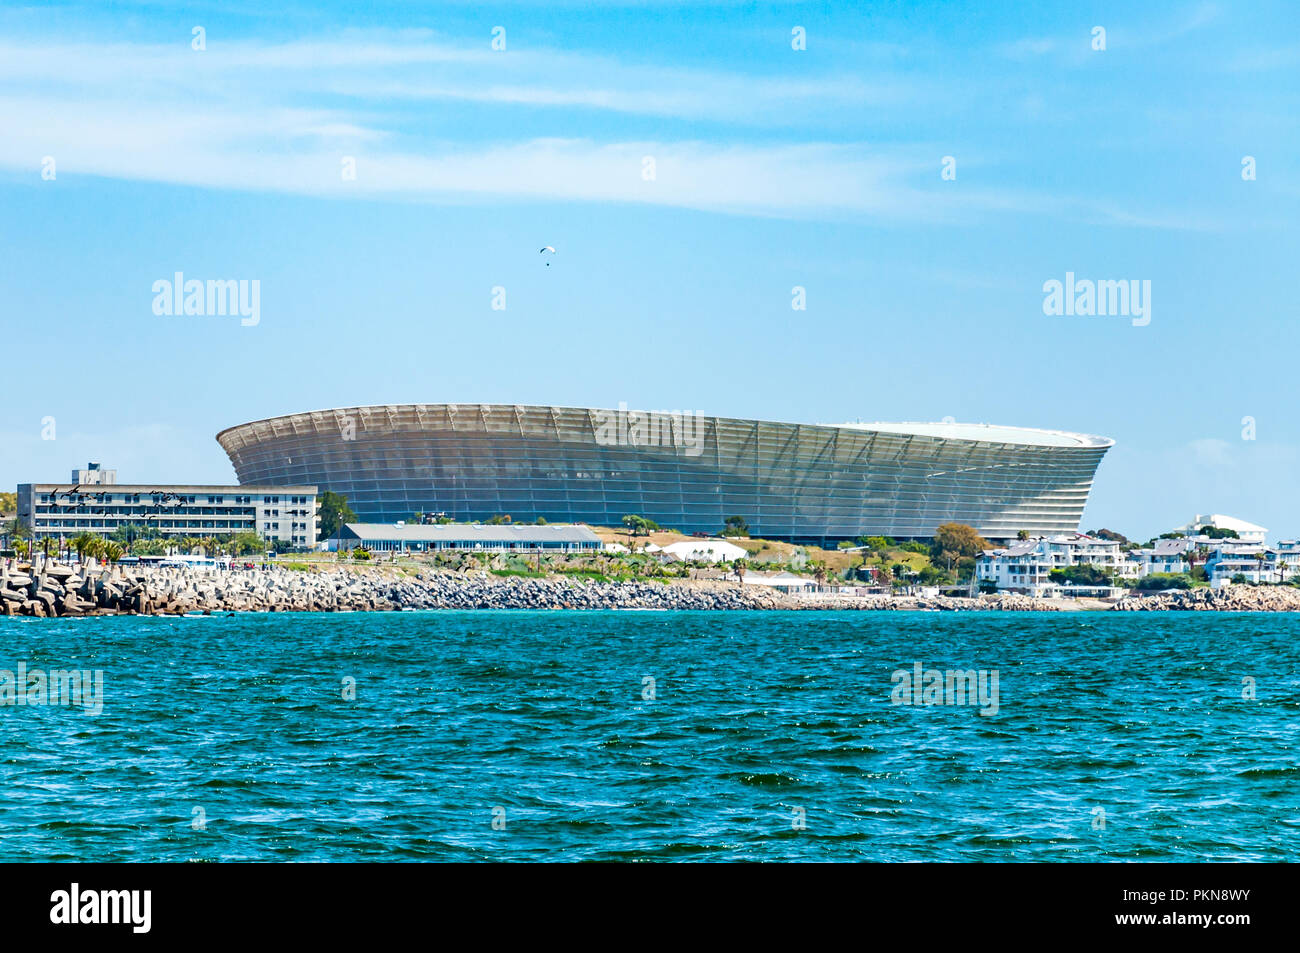 A paraglider above the Cape Town football stadium by the sea, South Africa Stock Photo